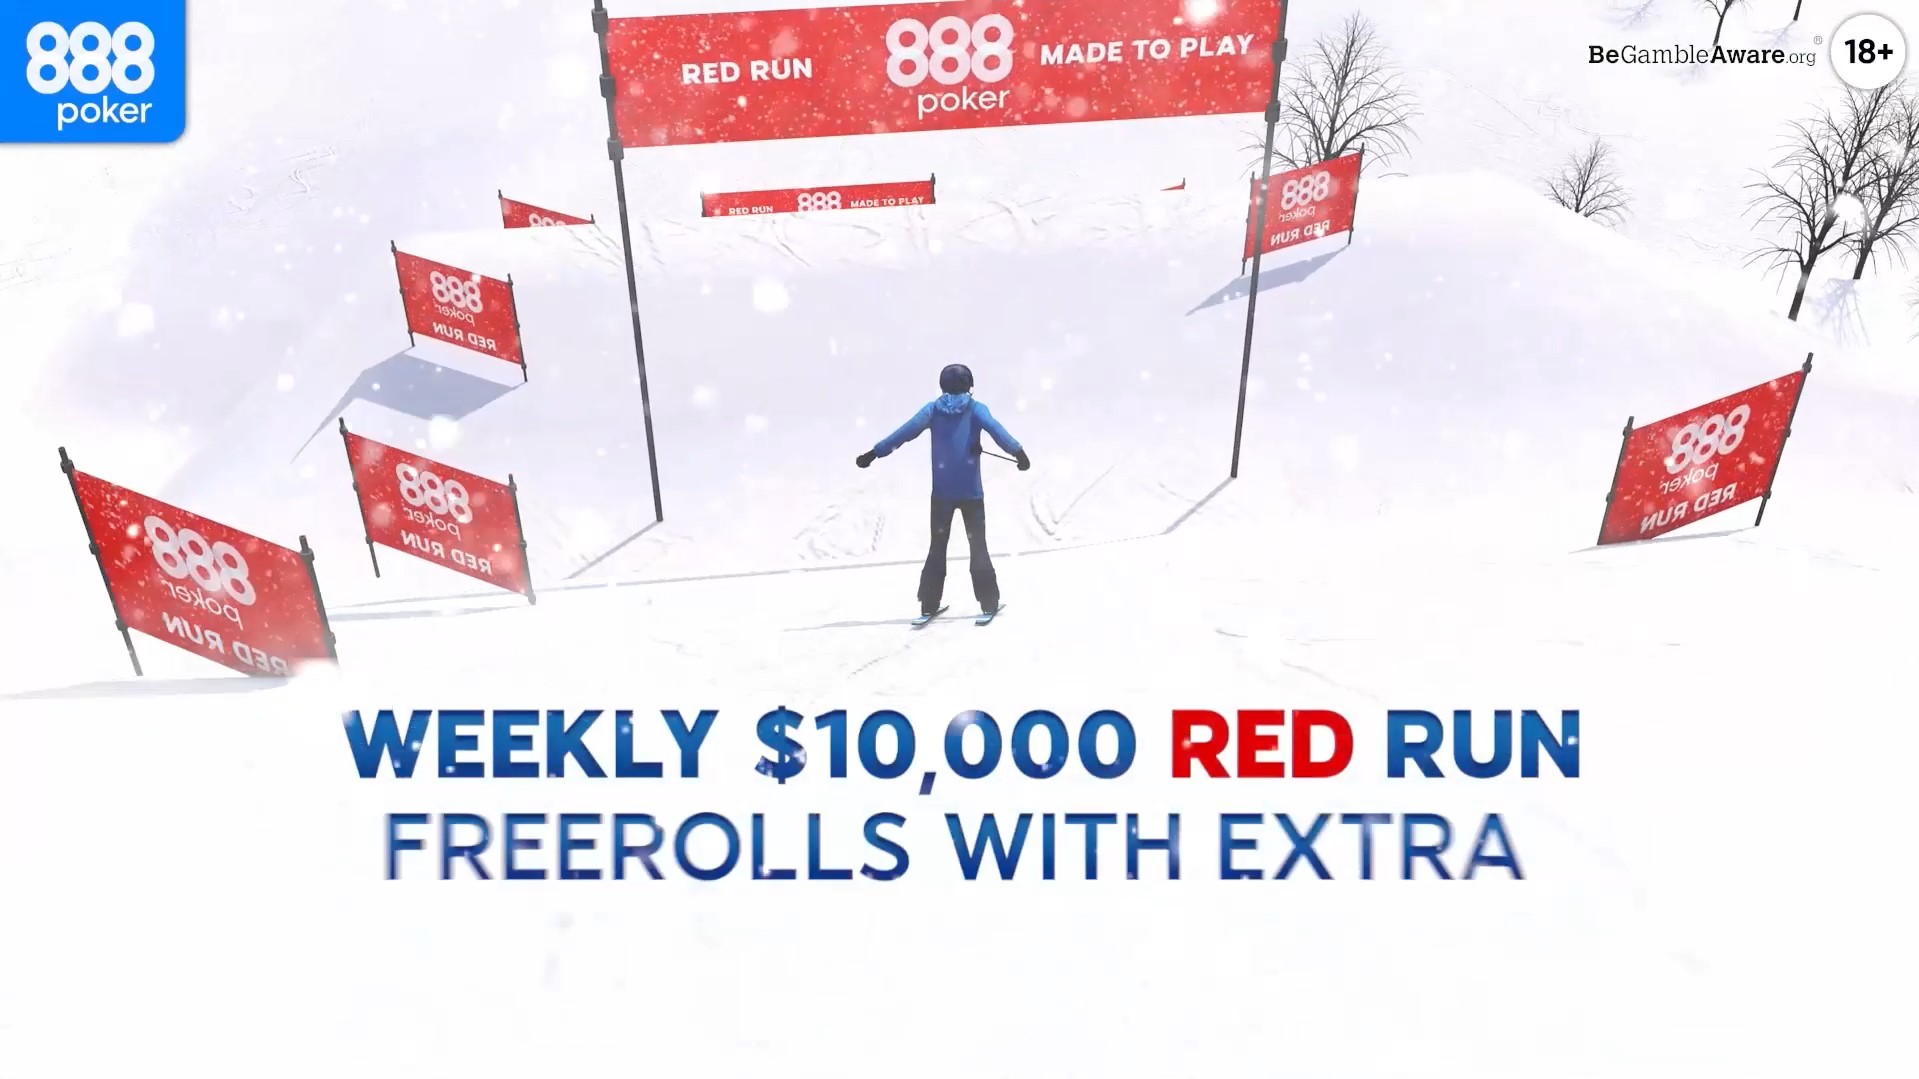 Ace the Slopes - Inside Edge Red Run Freeroll Tickets